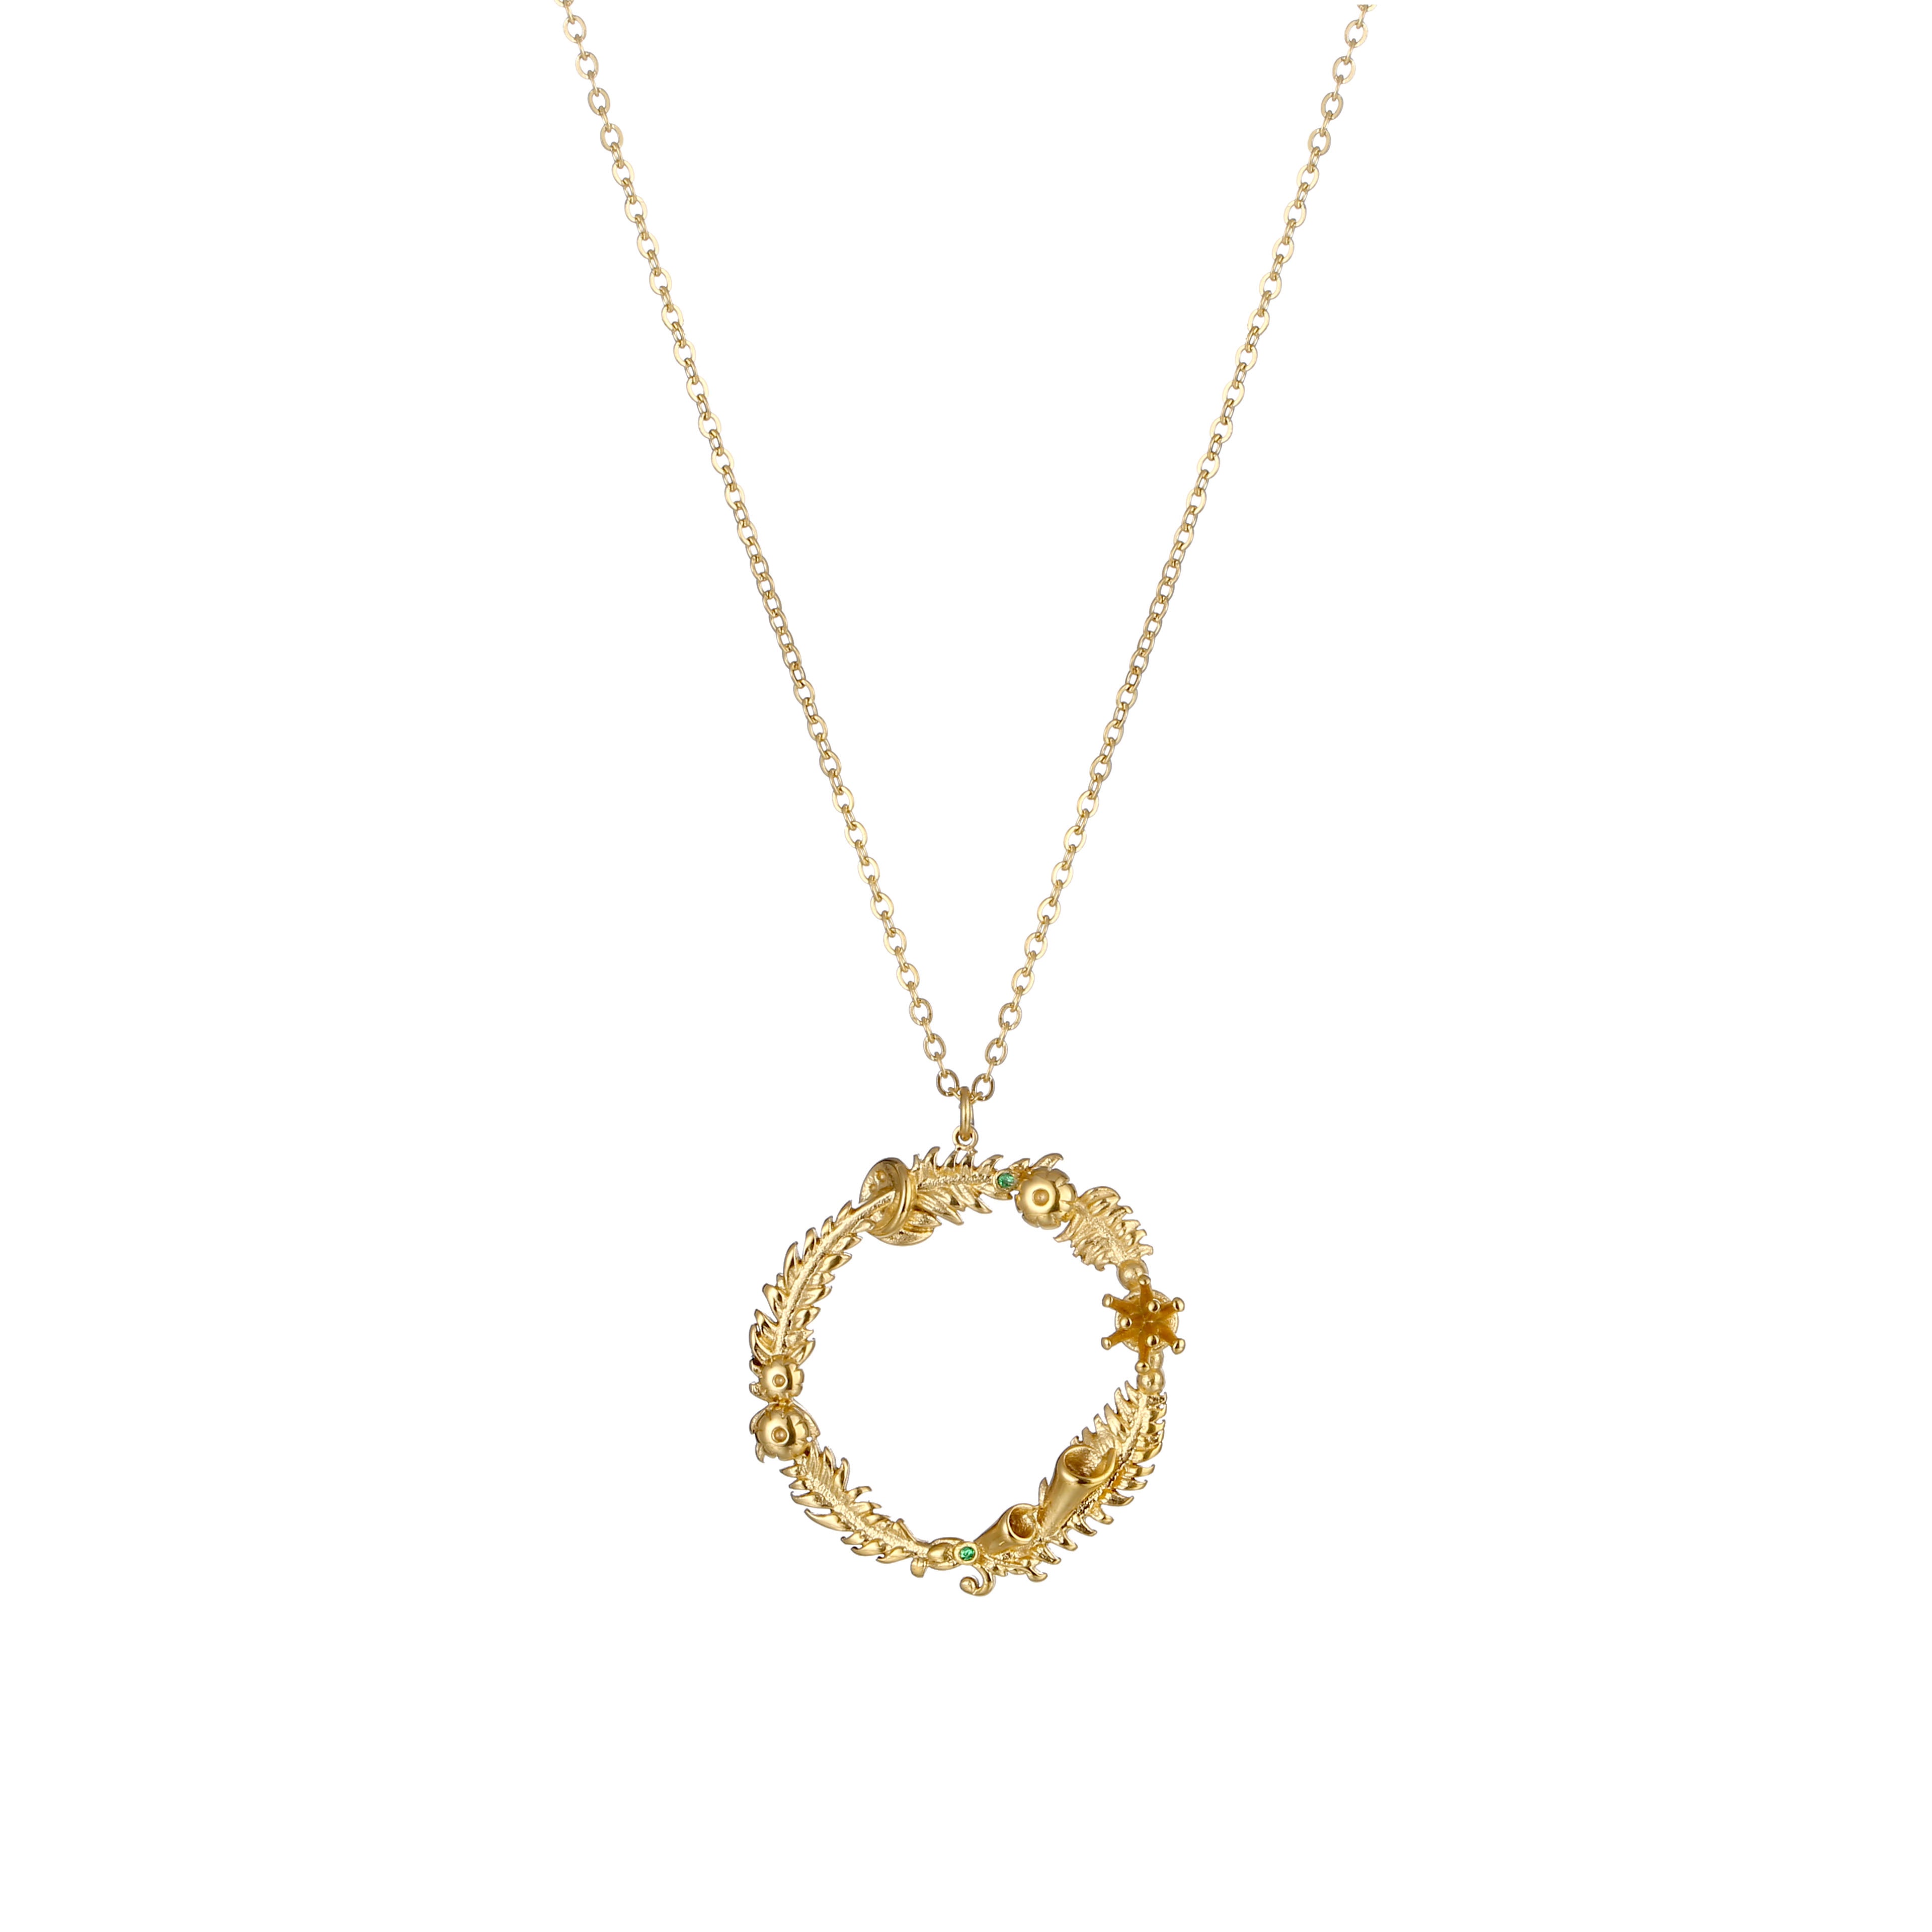 Our Willow necklace has been carefully designed to incorporate some very special aspects of a New Zealand summer. 
If you look closely you will seen the native NZ fe